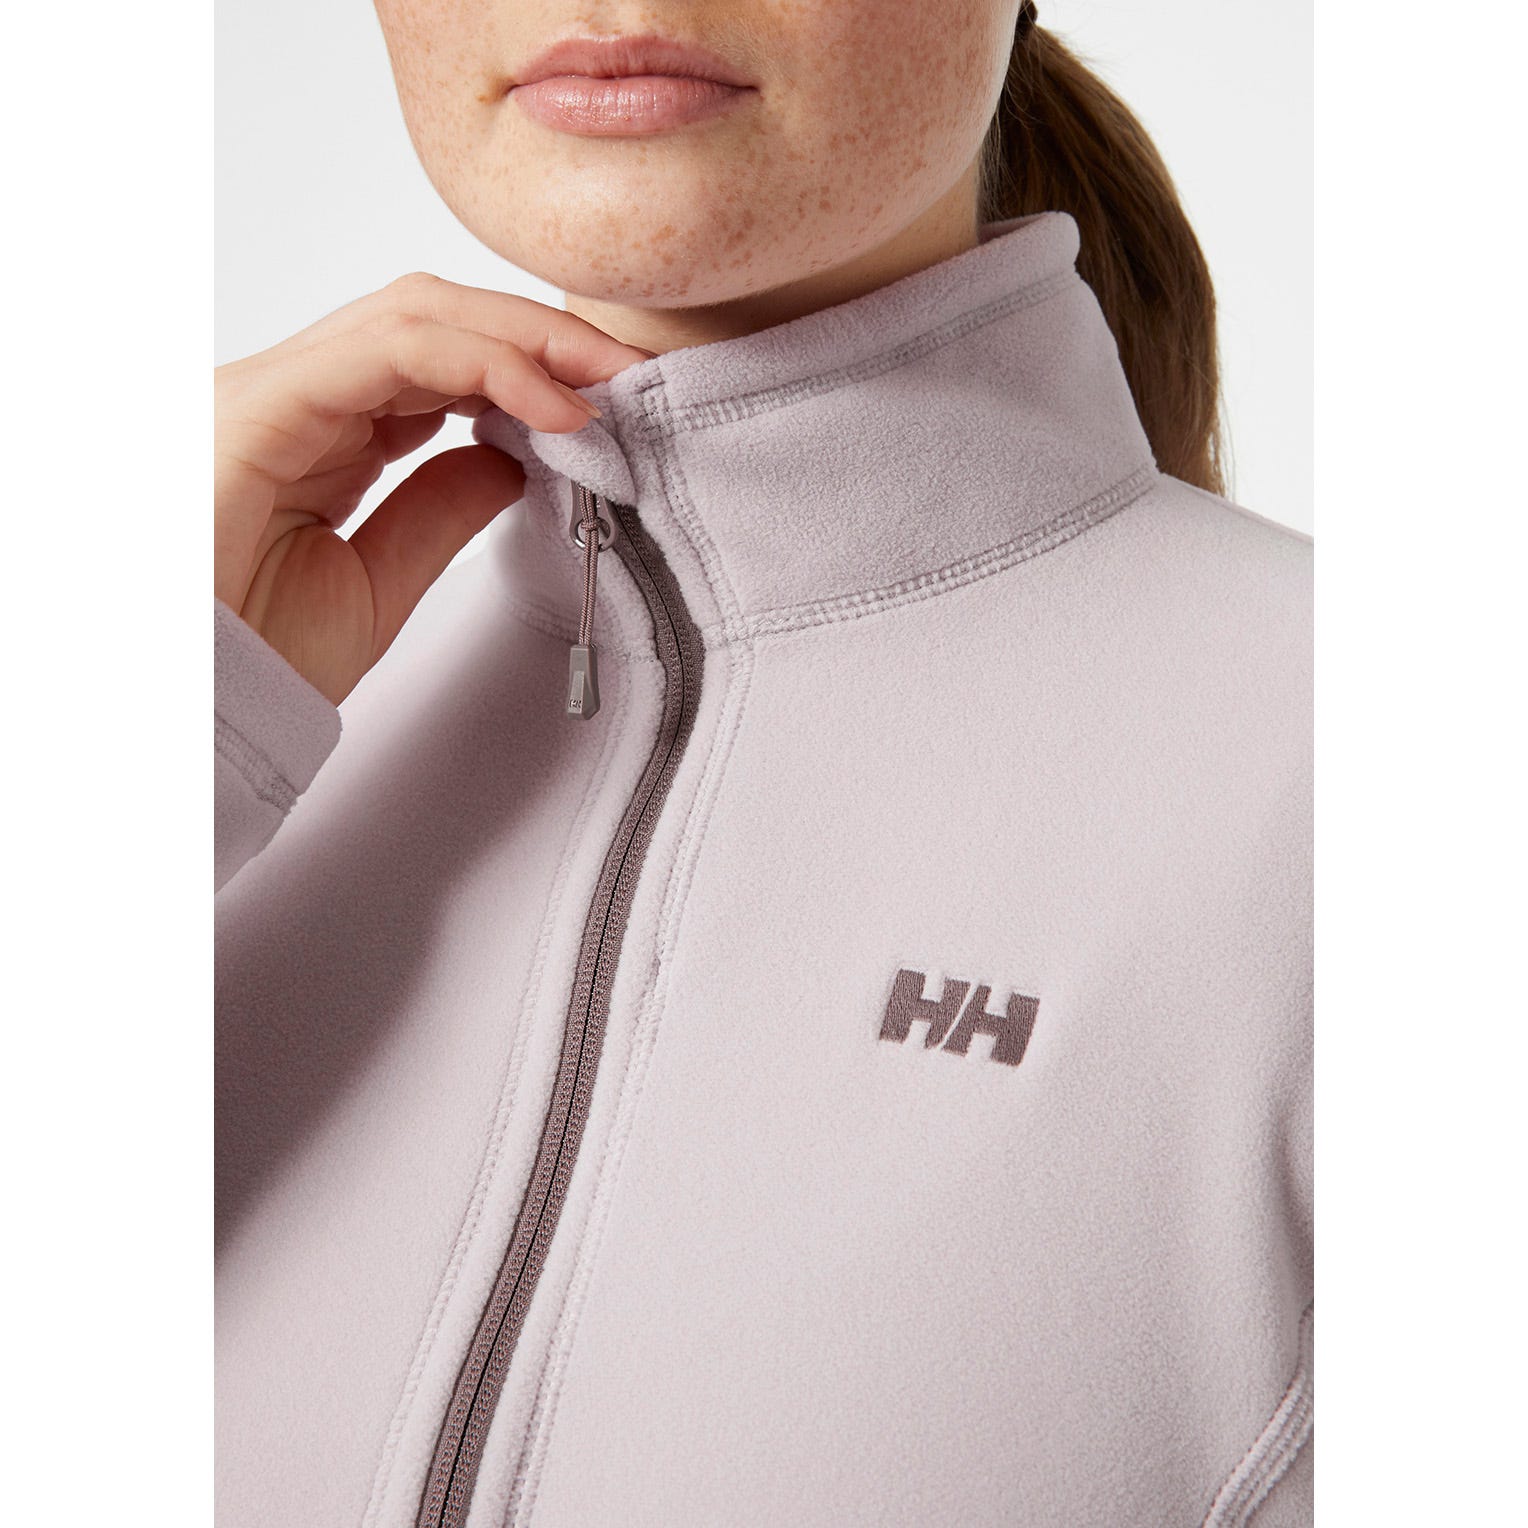 Helly Hansen Womens Fleece Jumper Jacket New and tagged at £54.99 Small Pewter 